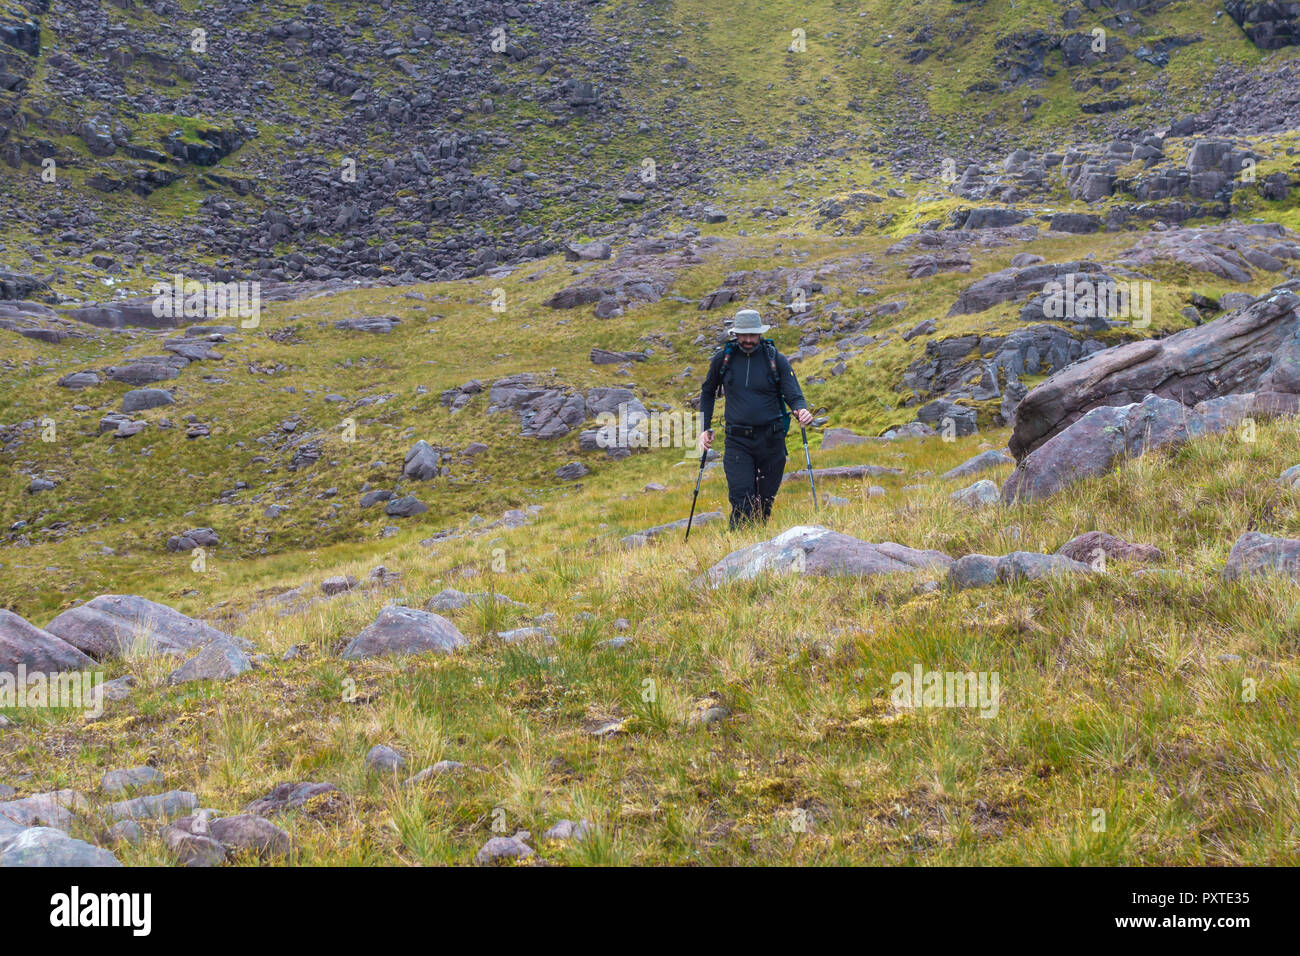 Scottish Highlands, UK - August 5, 2017: Solitude walker with backpack walking clothes hat and walking poles crossing a Scottish Highlands mountain me Stock Photo